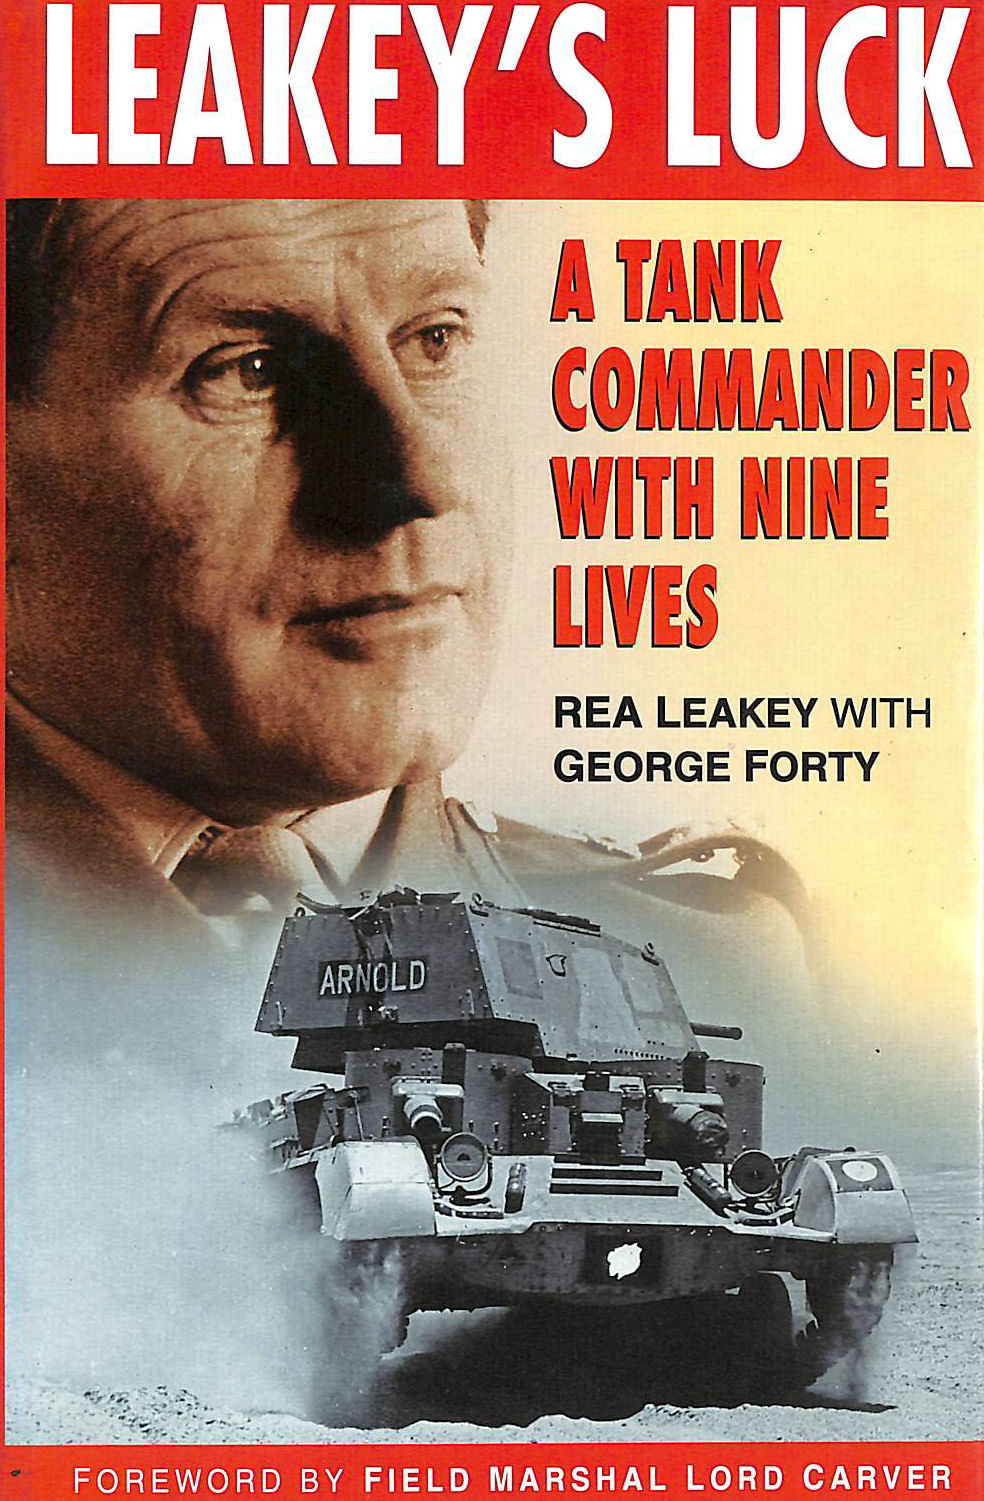 REA LEAKEY; GEORGE FORTY [EDITOR]; MICHAEL CARVER [FOREWORD]; - Leakey's Luck: A Tank Commander with Nine Lives